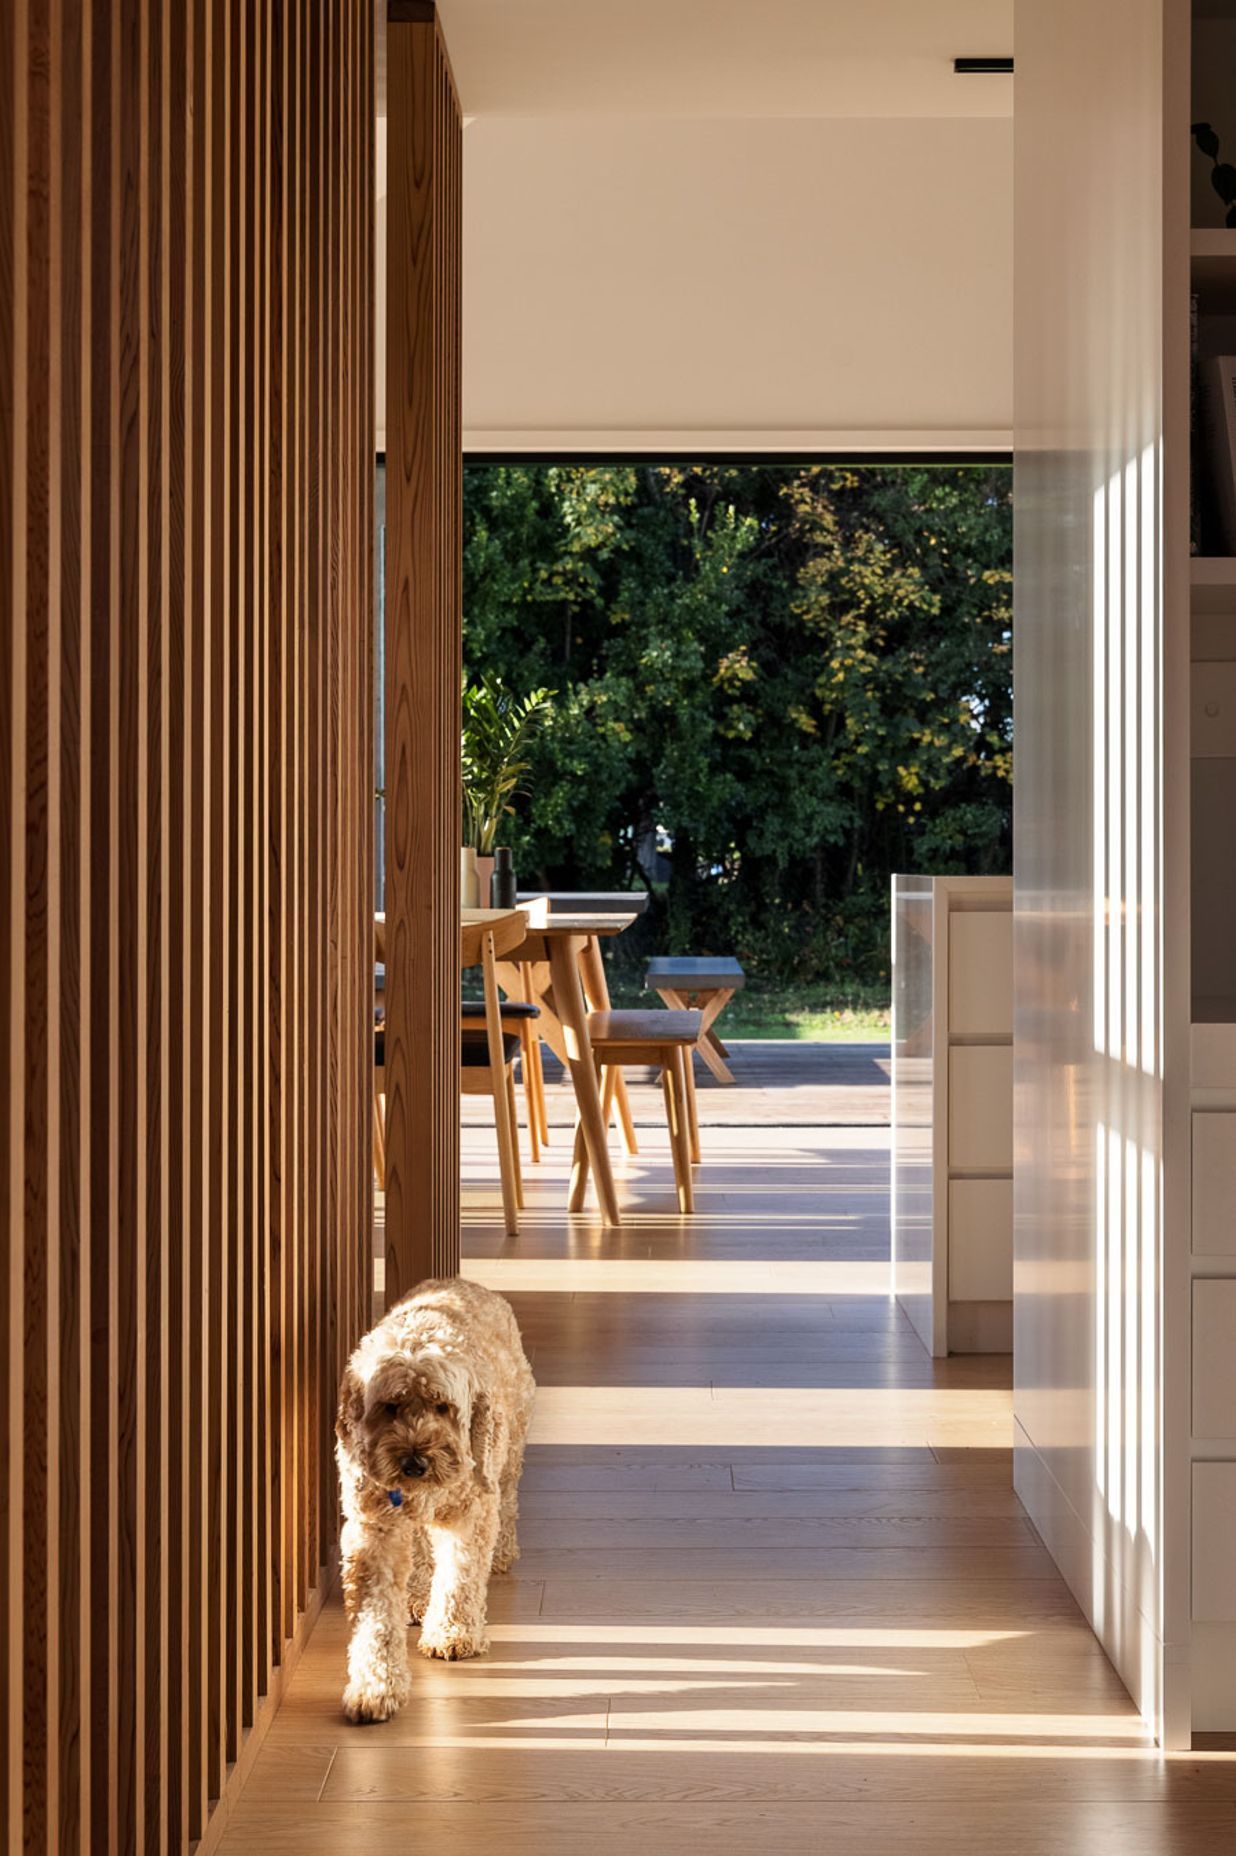 Open sight lines create a sense of seamlessness between the internal and external spaces.